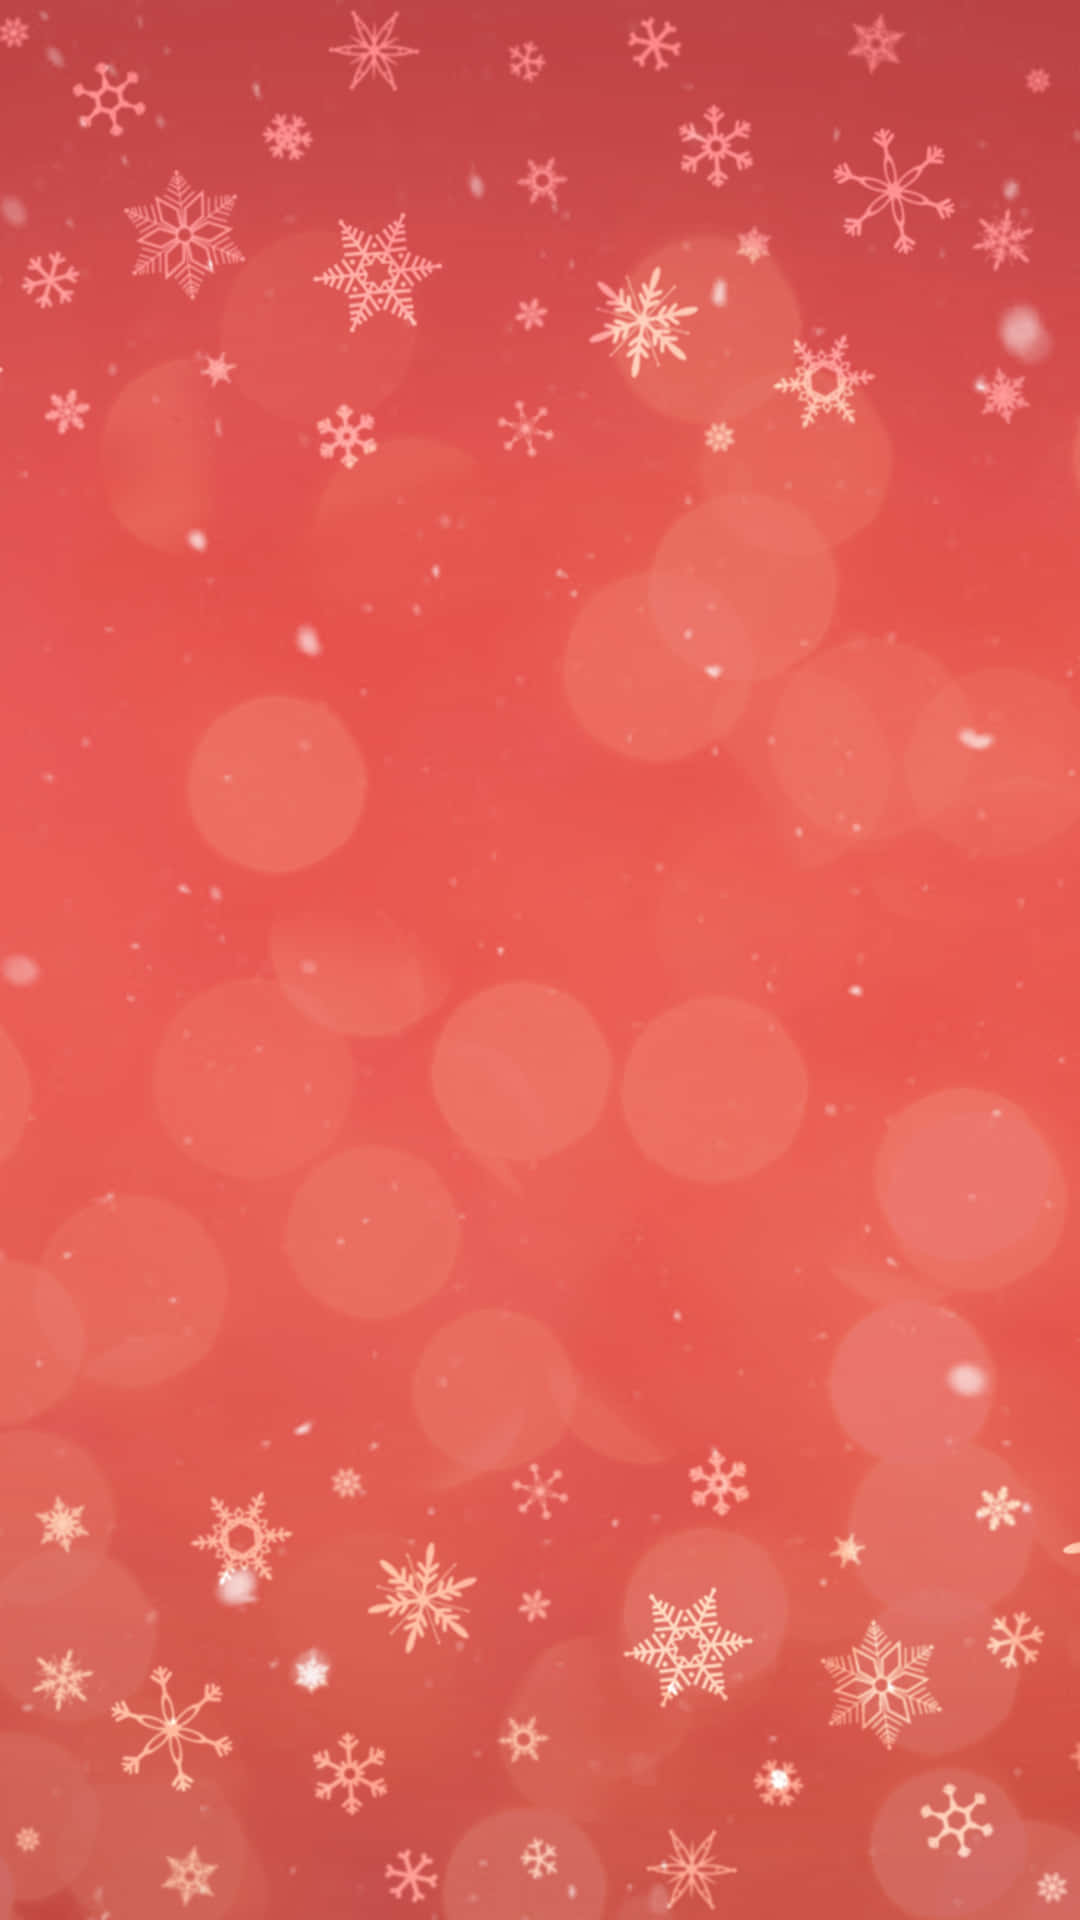 Festive Christmas Background with Sparkling Ornaments and Starry Night Wallpaper